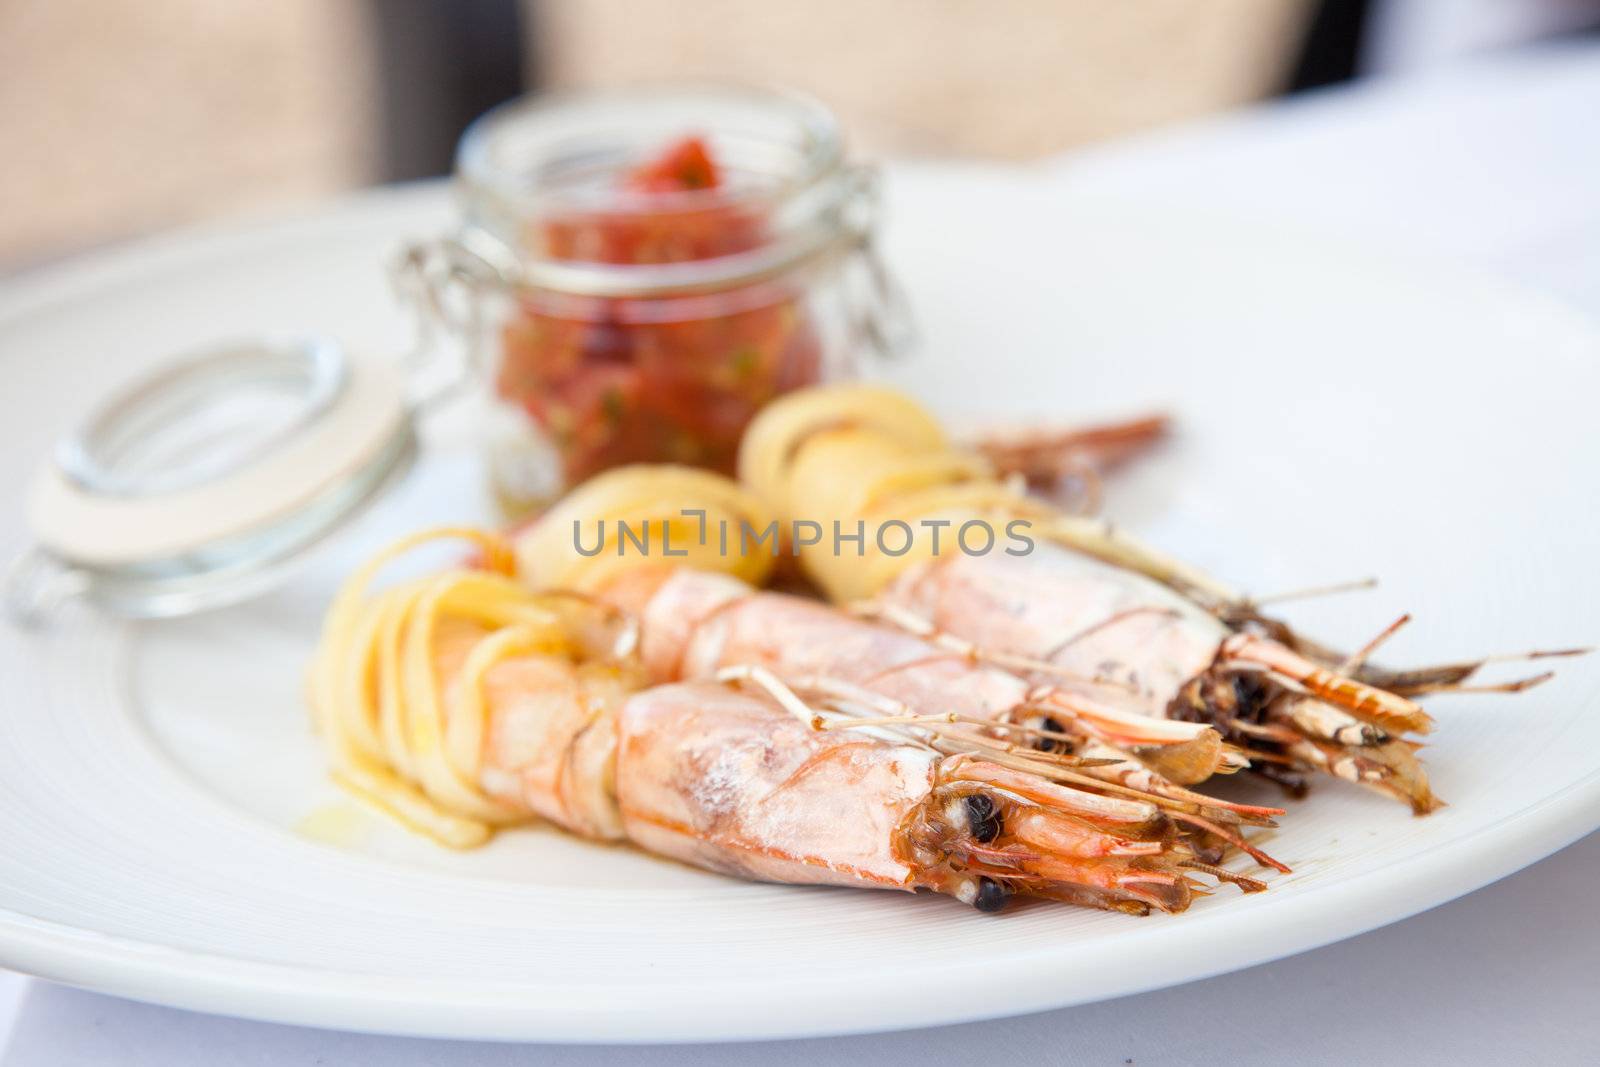 Delicious plate of prawns as an appetizer wrapped in pasta